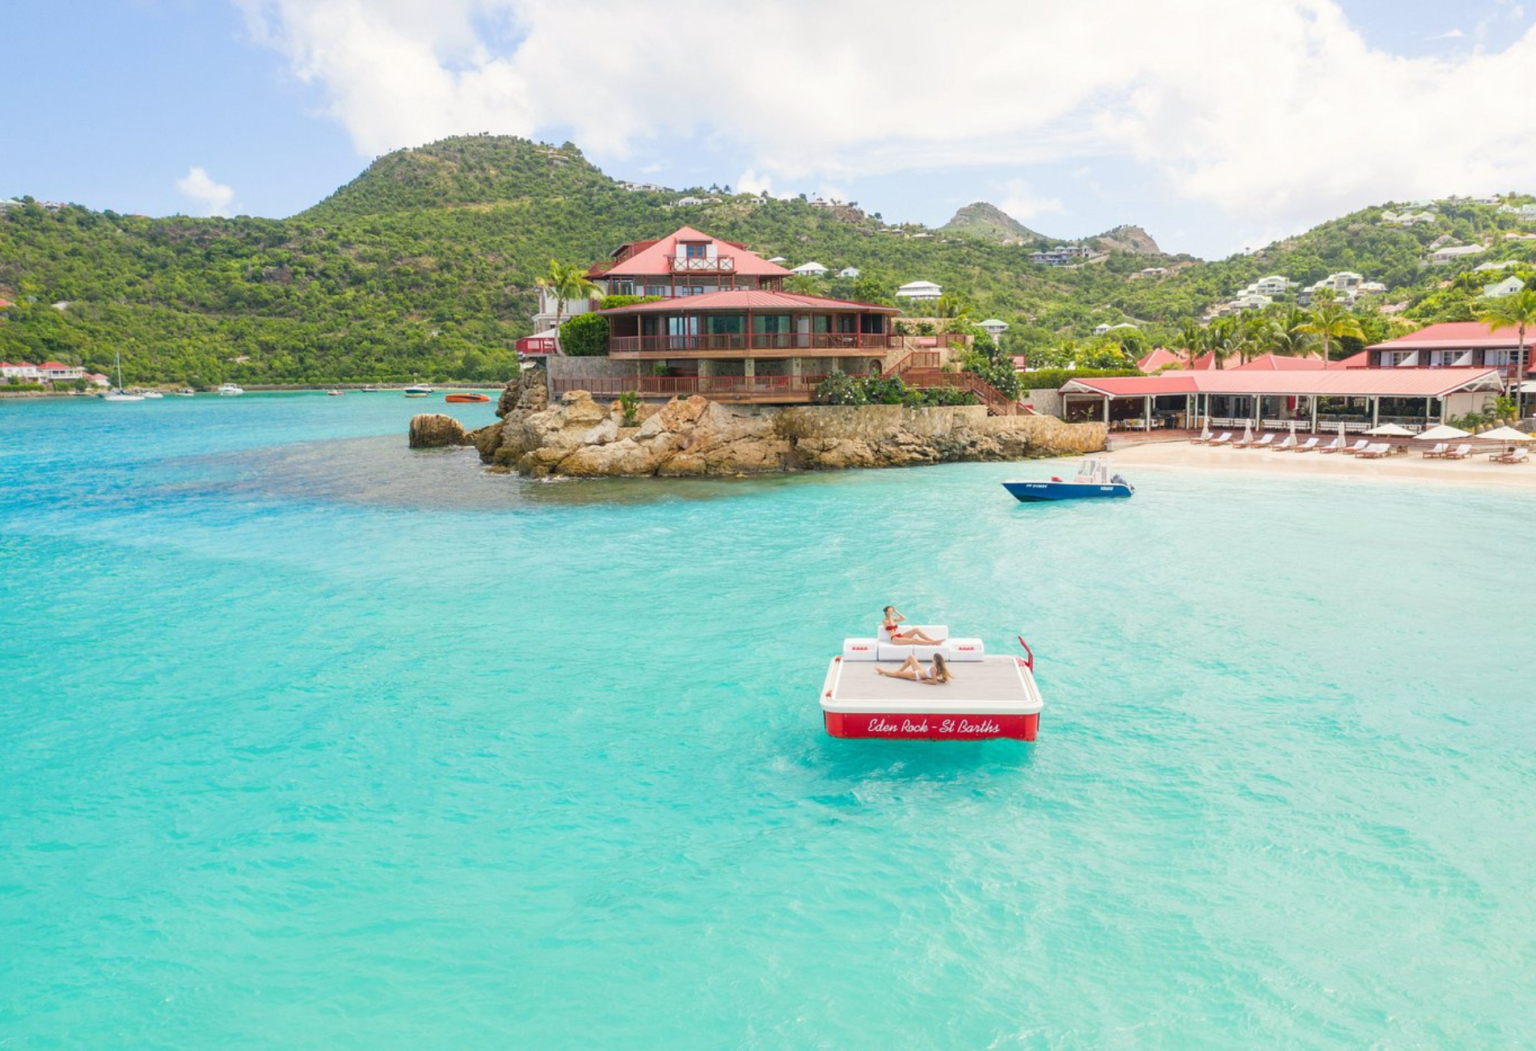 Bird's eye view of Eden Rock, where the Sand Bar is one of the best restaurants in St. Barts